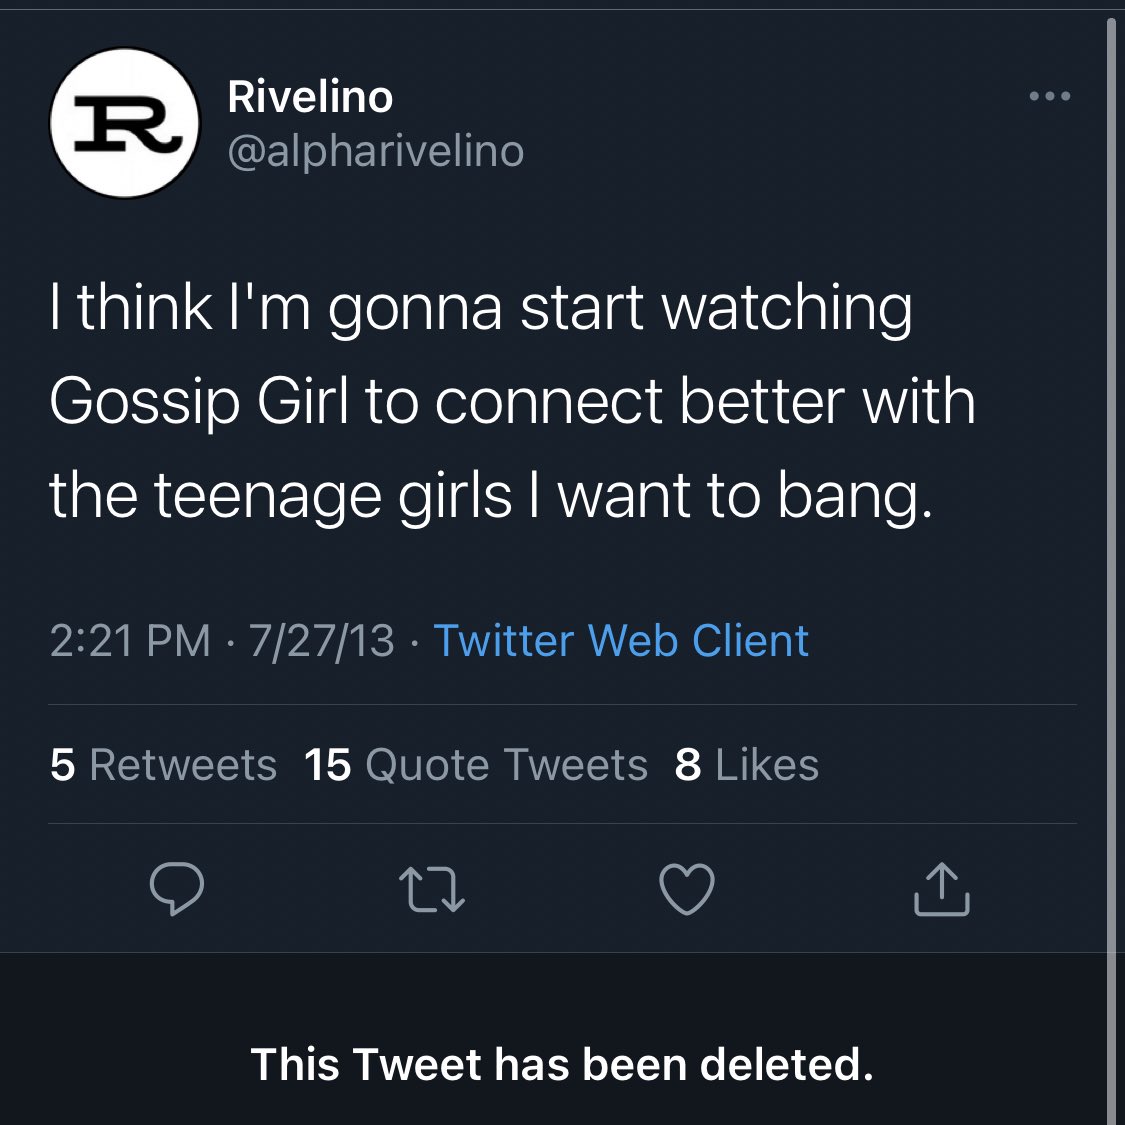 our favorite deleted tweets - sai teerth devotional theme park - R Rivelino I think I'm gonna start watching Gossip Girl to connect better with the teenage girls I want to bang. 72713. Twitter Web Client 5 15 Quote Tweets 8 This Tweet has been deleted.